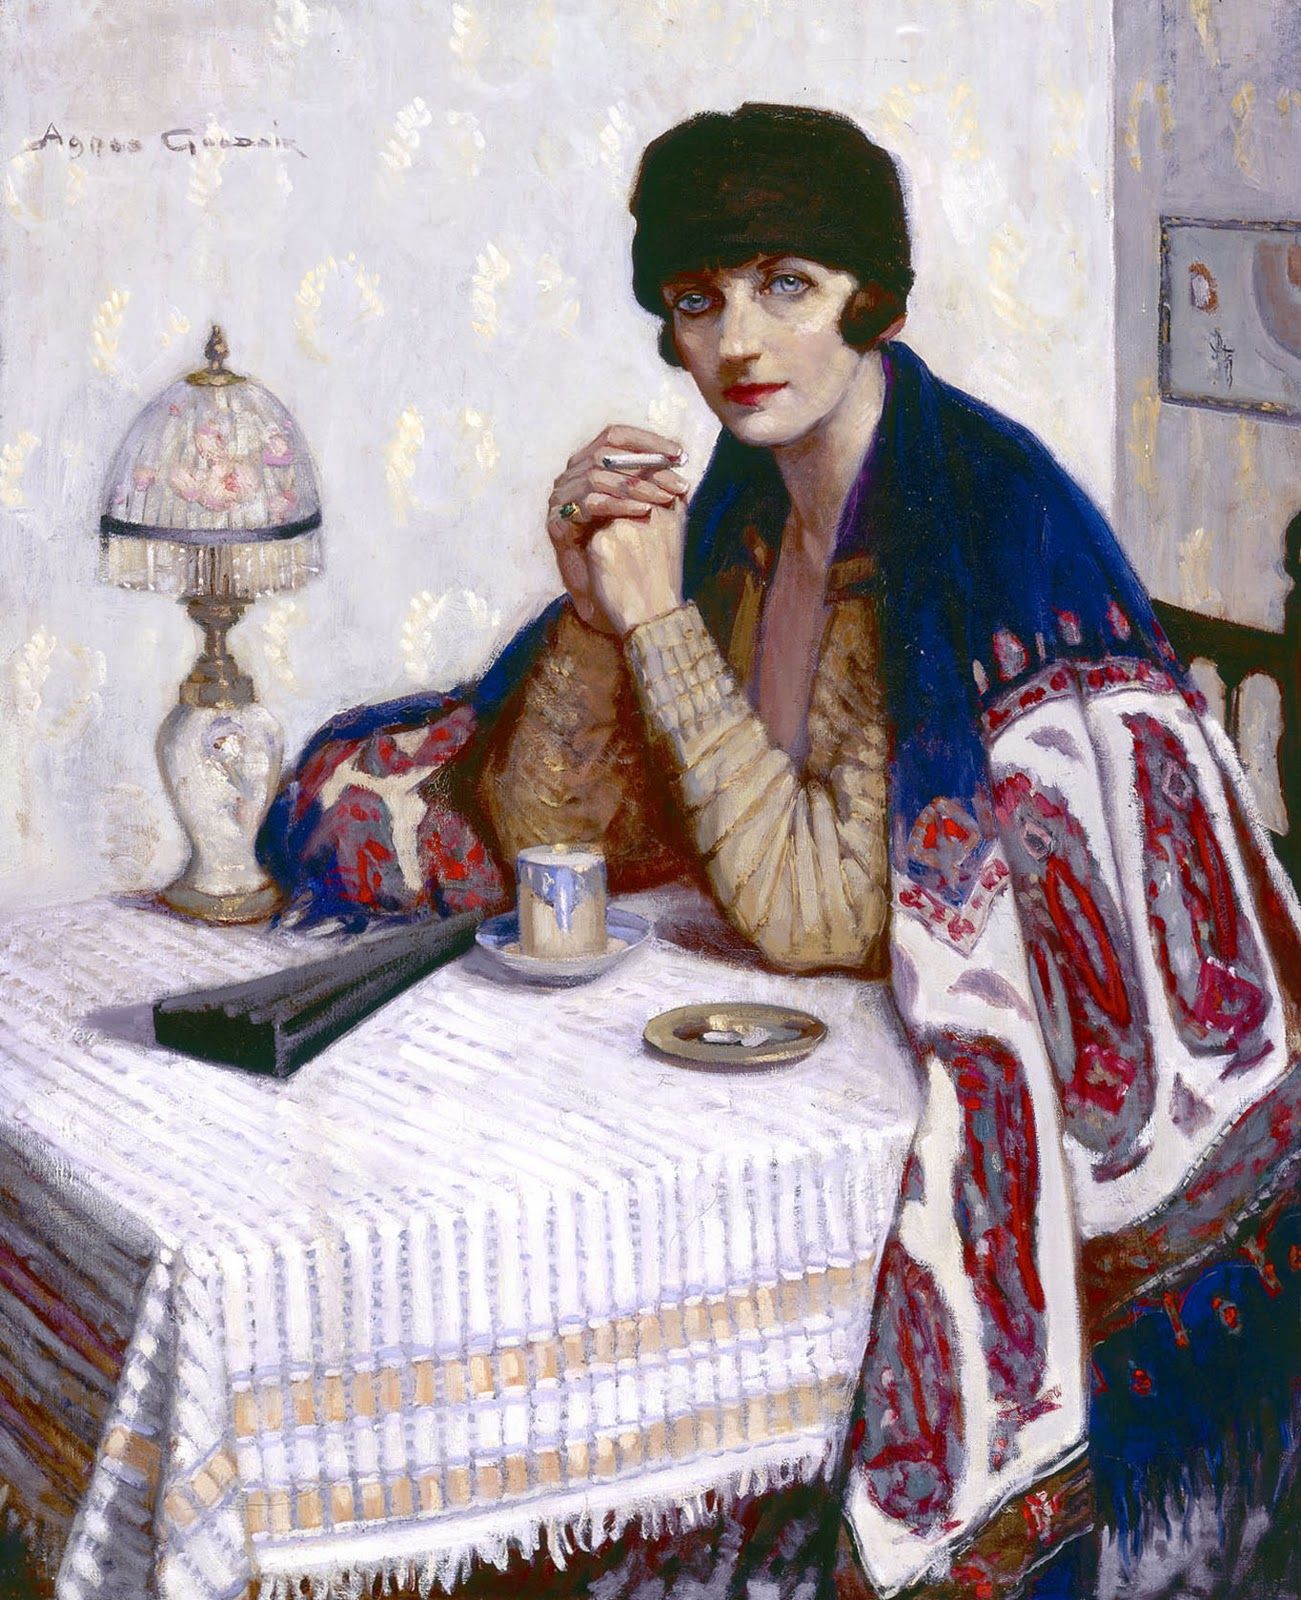 Girl With Cigarette by Agnes Goodsir - 1925 - 100 x 81cm private collection